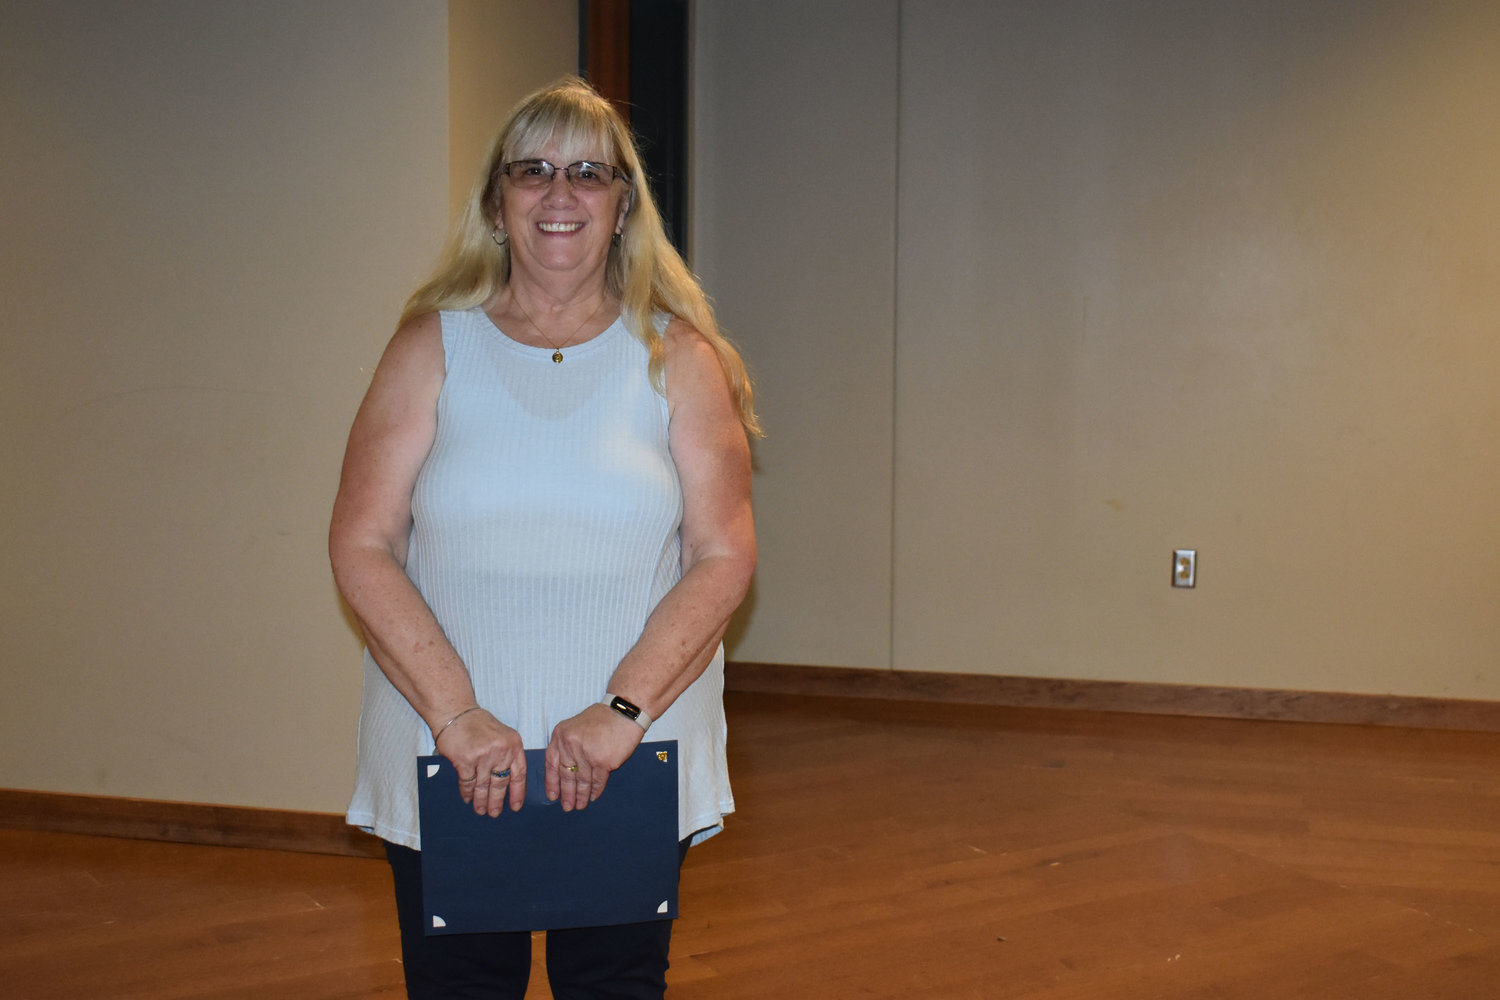 Herkimer-Fulton-Hamilton-Otsego BOCES recognized staff on Wednesday, Aug. 31, for reaching milestones in their number of years at Herkimer BOCES. Pictured here, Frances Bishal was honored for her 25 years of service.